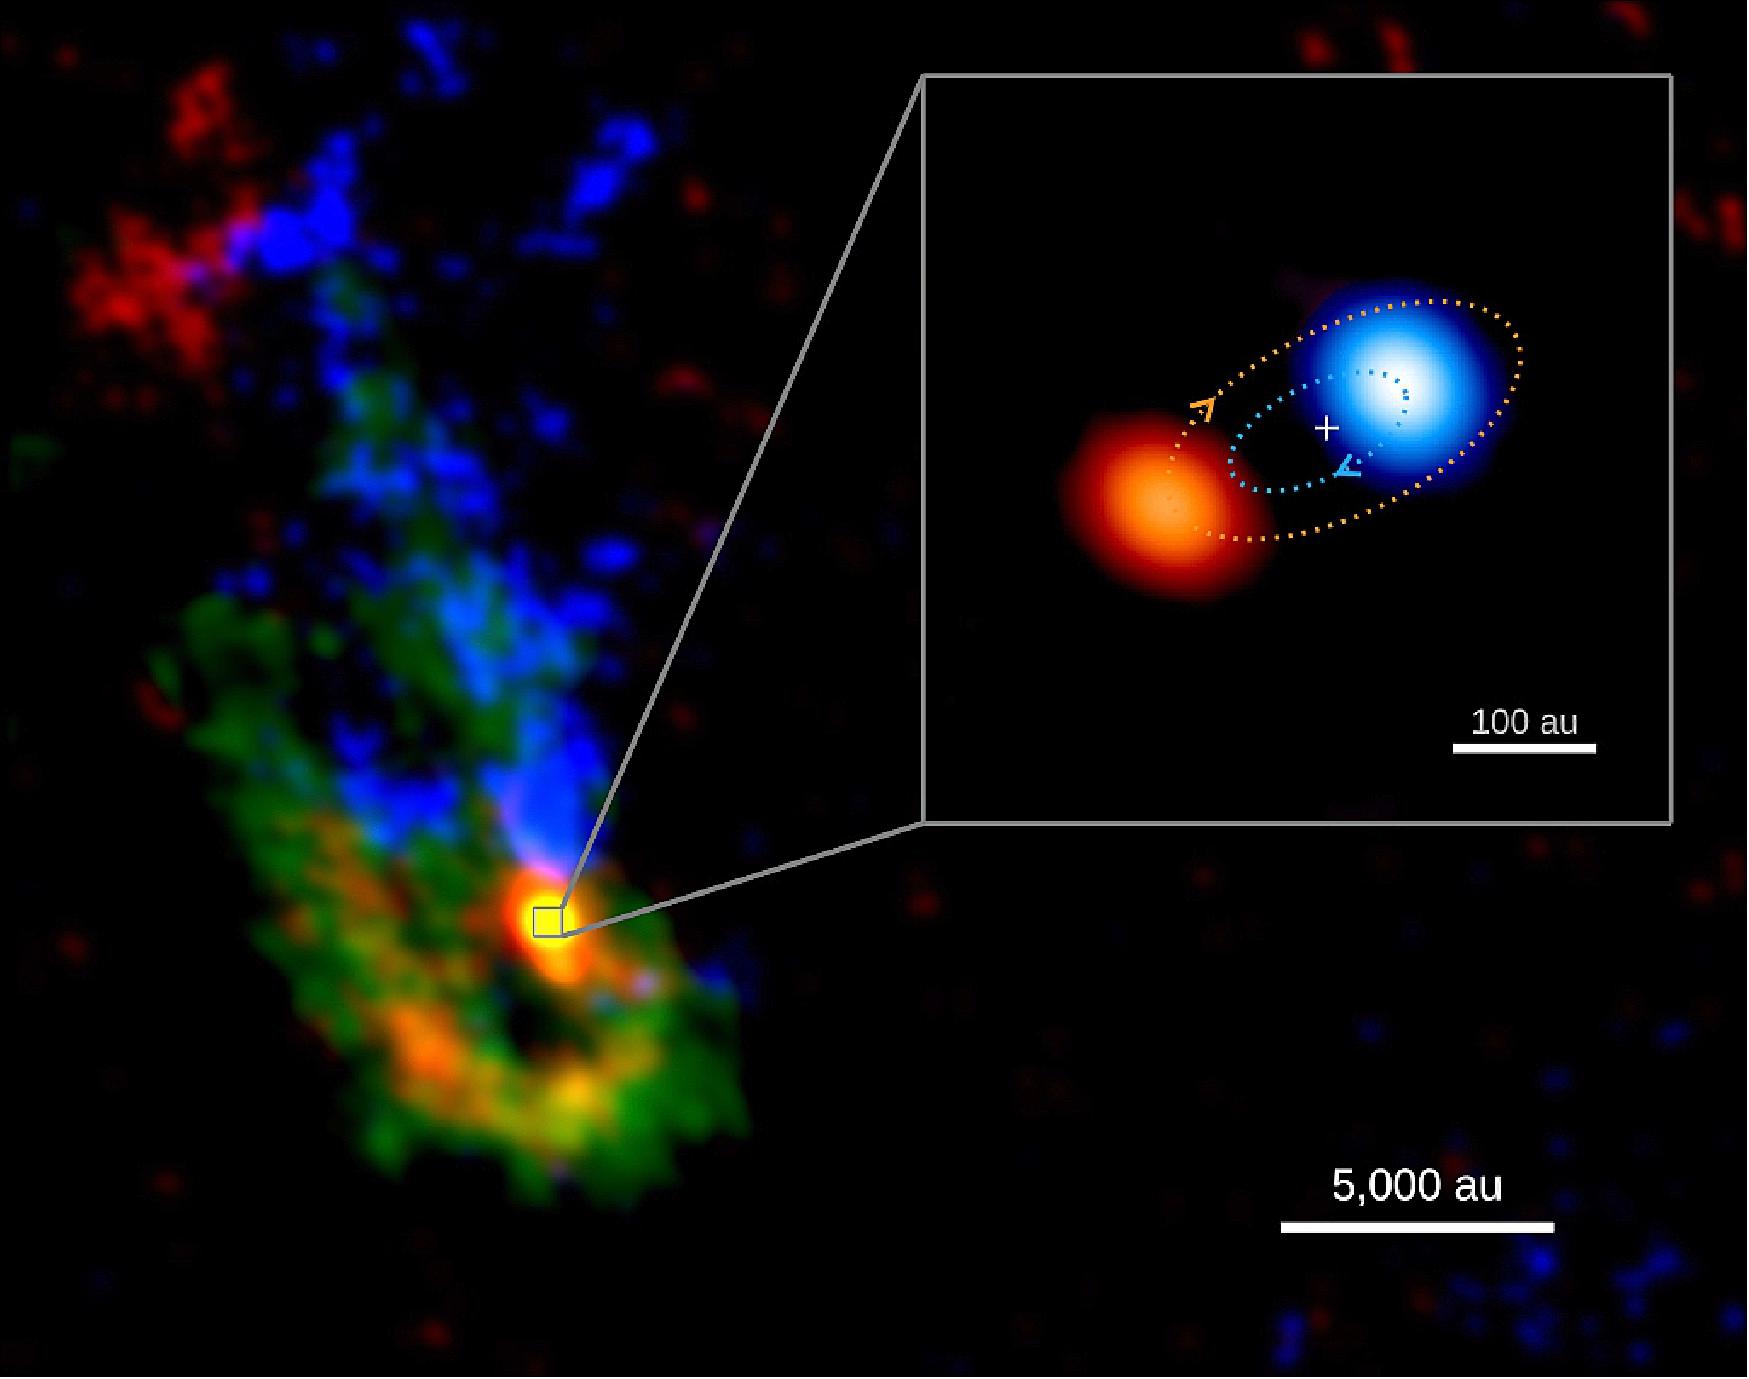 Figure 96: ALMA’s view of the IRAS-07299 star-forming region and the massive binary system at its center. The background image shows dense, dusty streams of gas (shown in green) that appear to be flowing towards the center. Gas motions, as traced by the methanol molecule, that are towards us are shown in blue; motions away from us in red. The inset image shows a zoom-in view of the massive forming binary, with the brighter, primary protostar moving toward us is shown in blue and the fainter, secondary protostar moving away from us shown in red. The blue and red dotted lines show an example of orbits of the primary and secondary spiraling around their center of mass (marked by the cross) image credit: Riken & Study Team